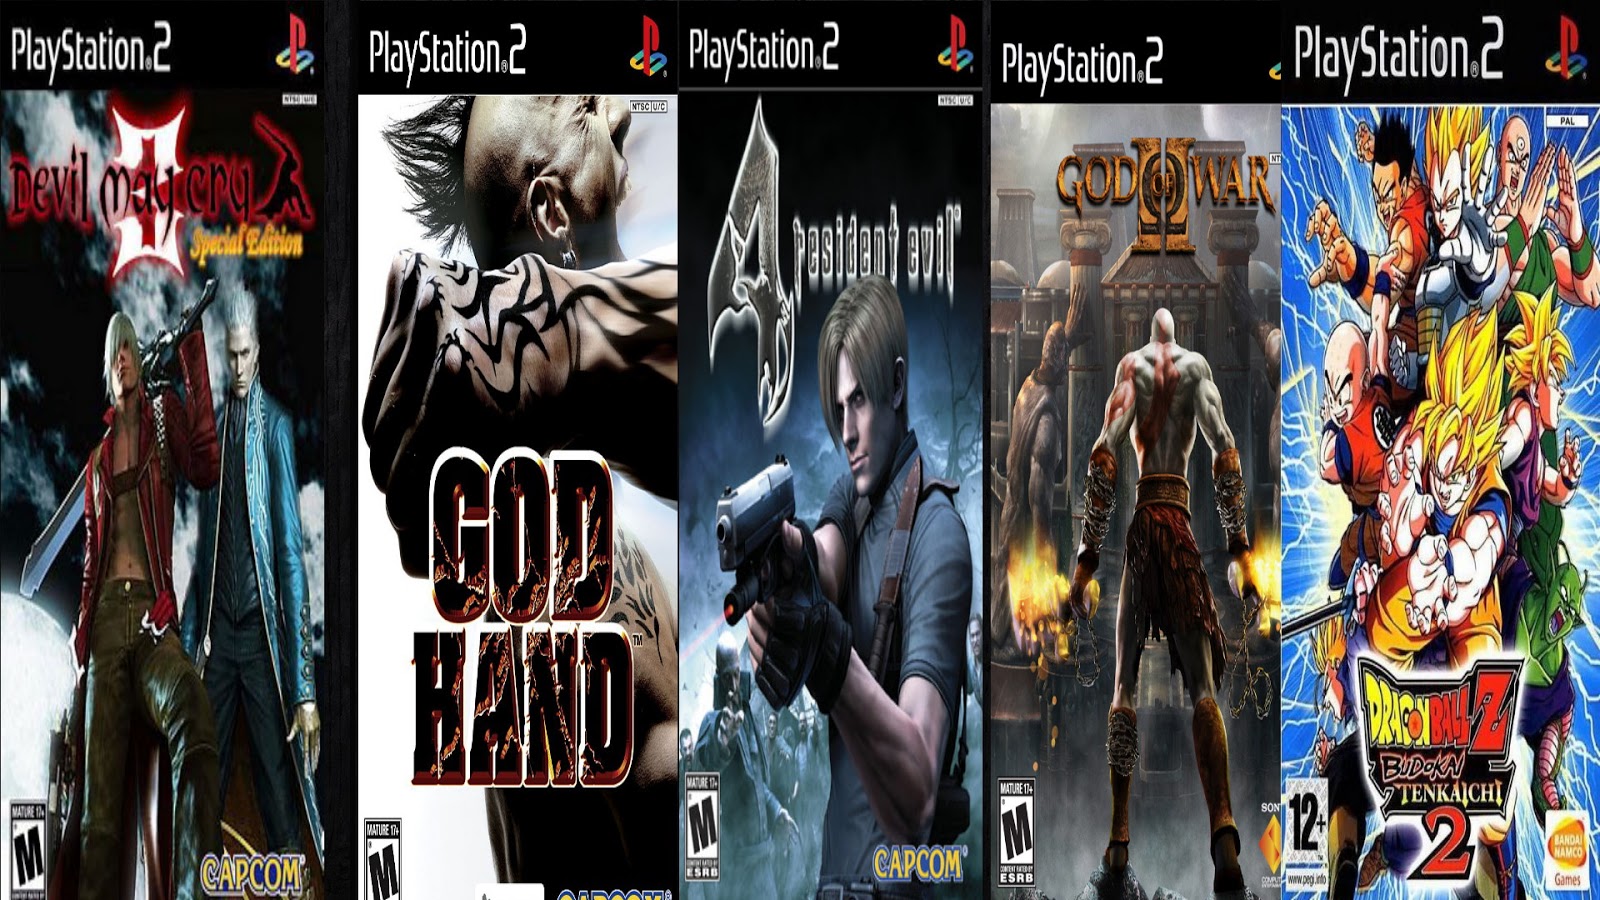 download game ps2 iso kecil mb